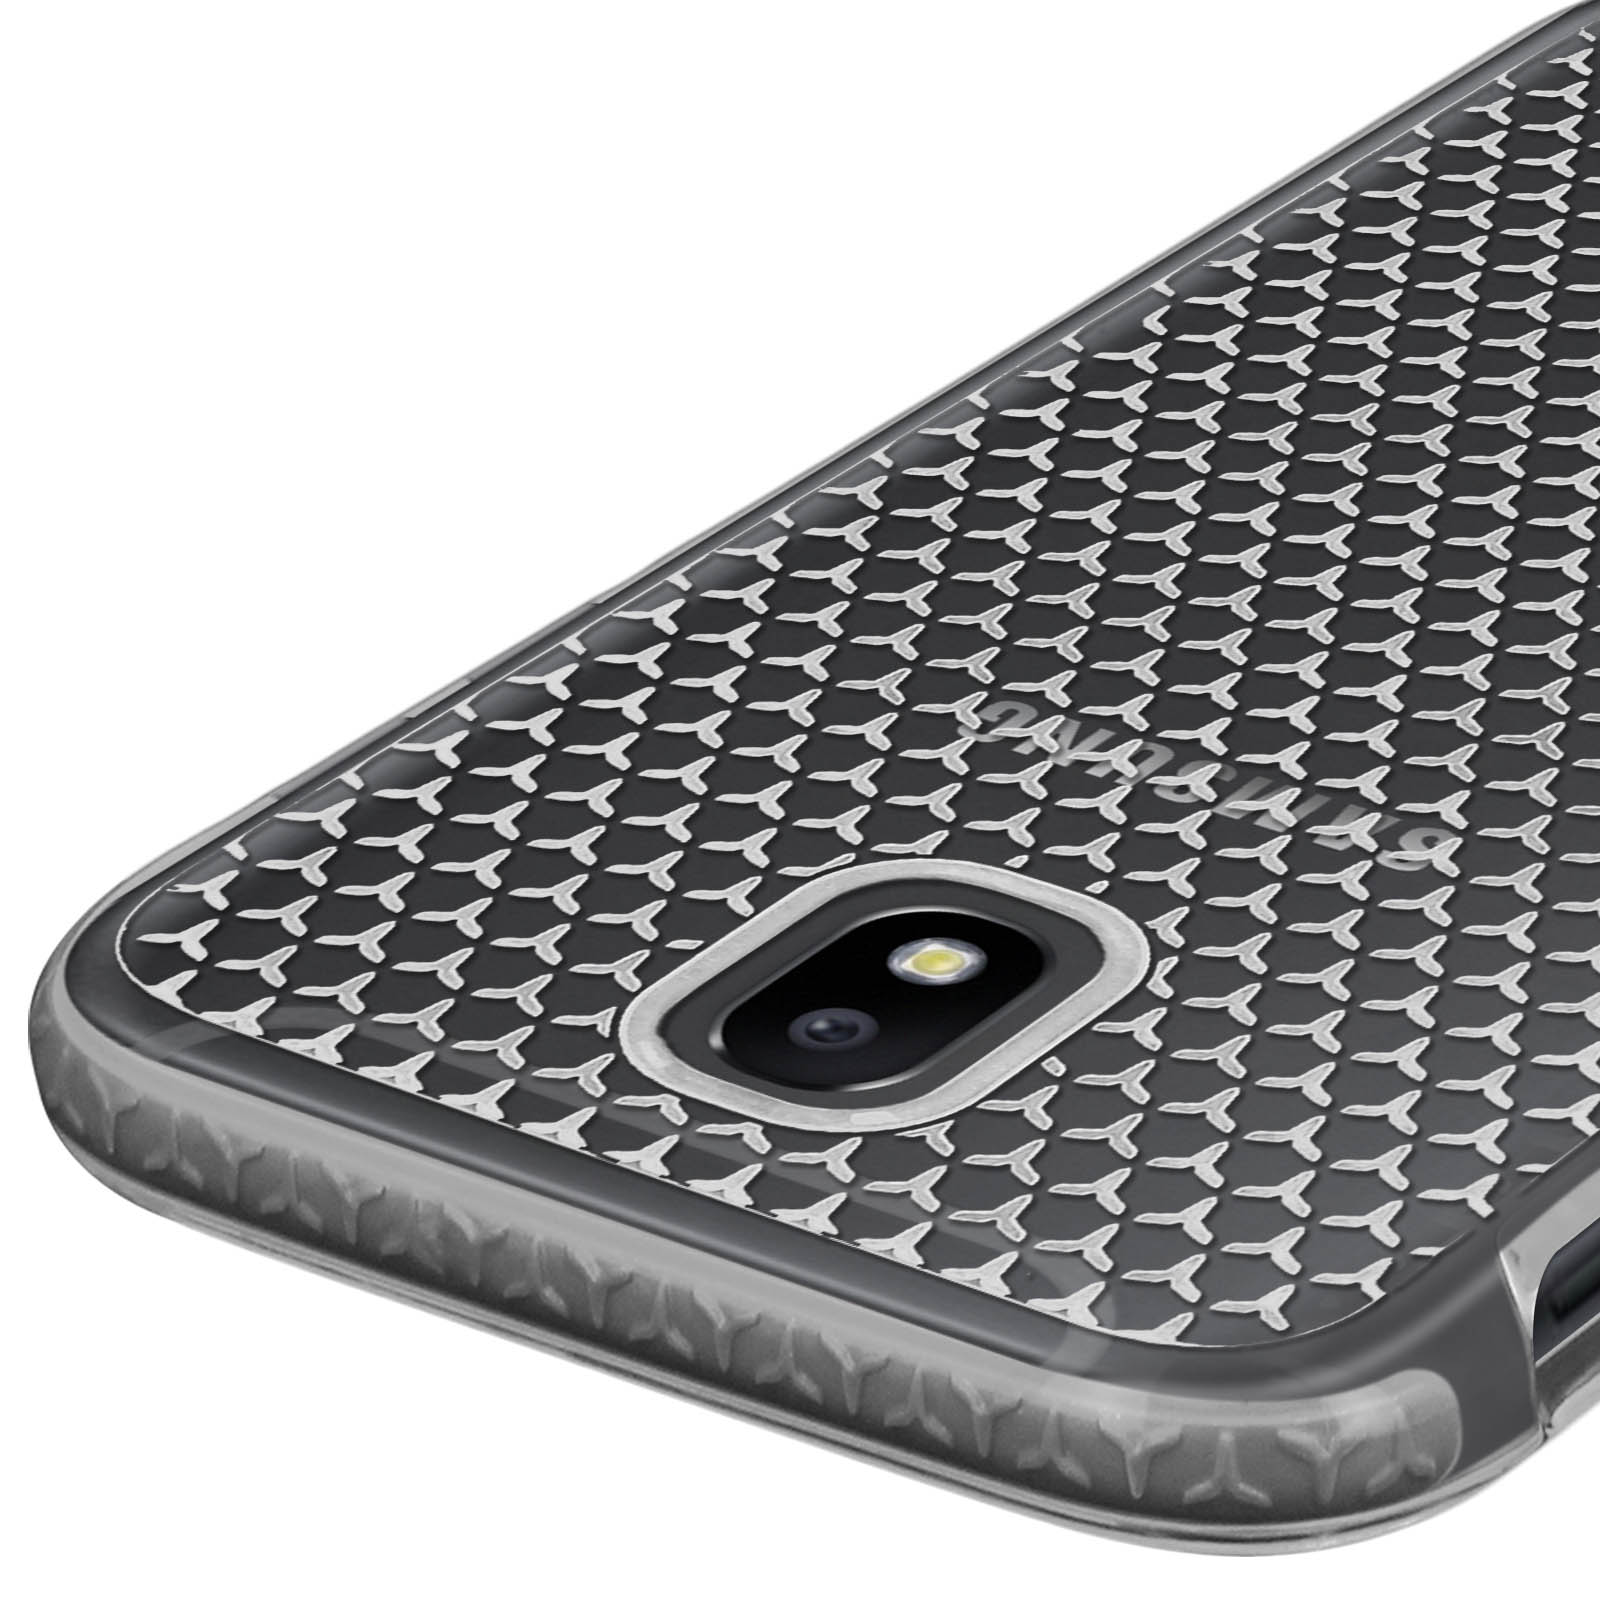 mit 2017, Tryax-System Samsung, Series, J5 Backcover, Life Silber CASE FORCE Galaxy